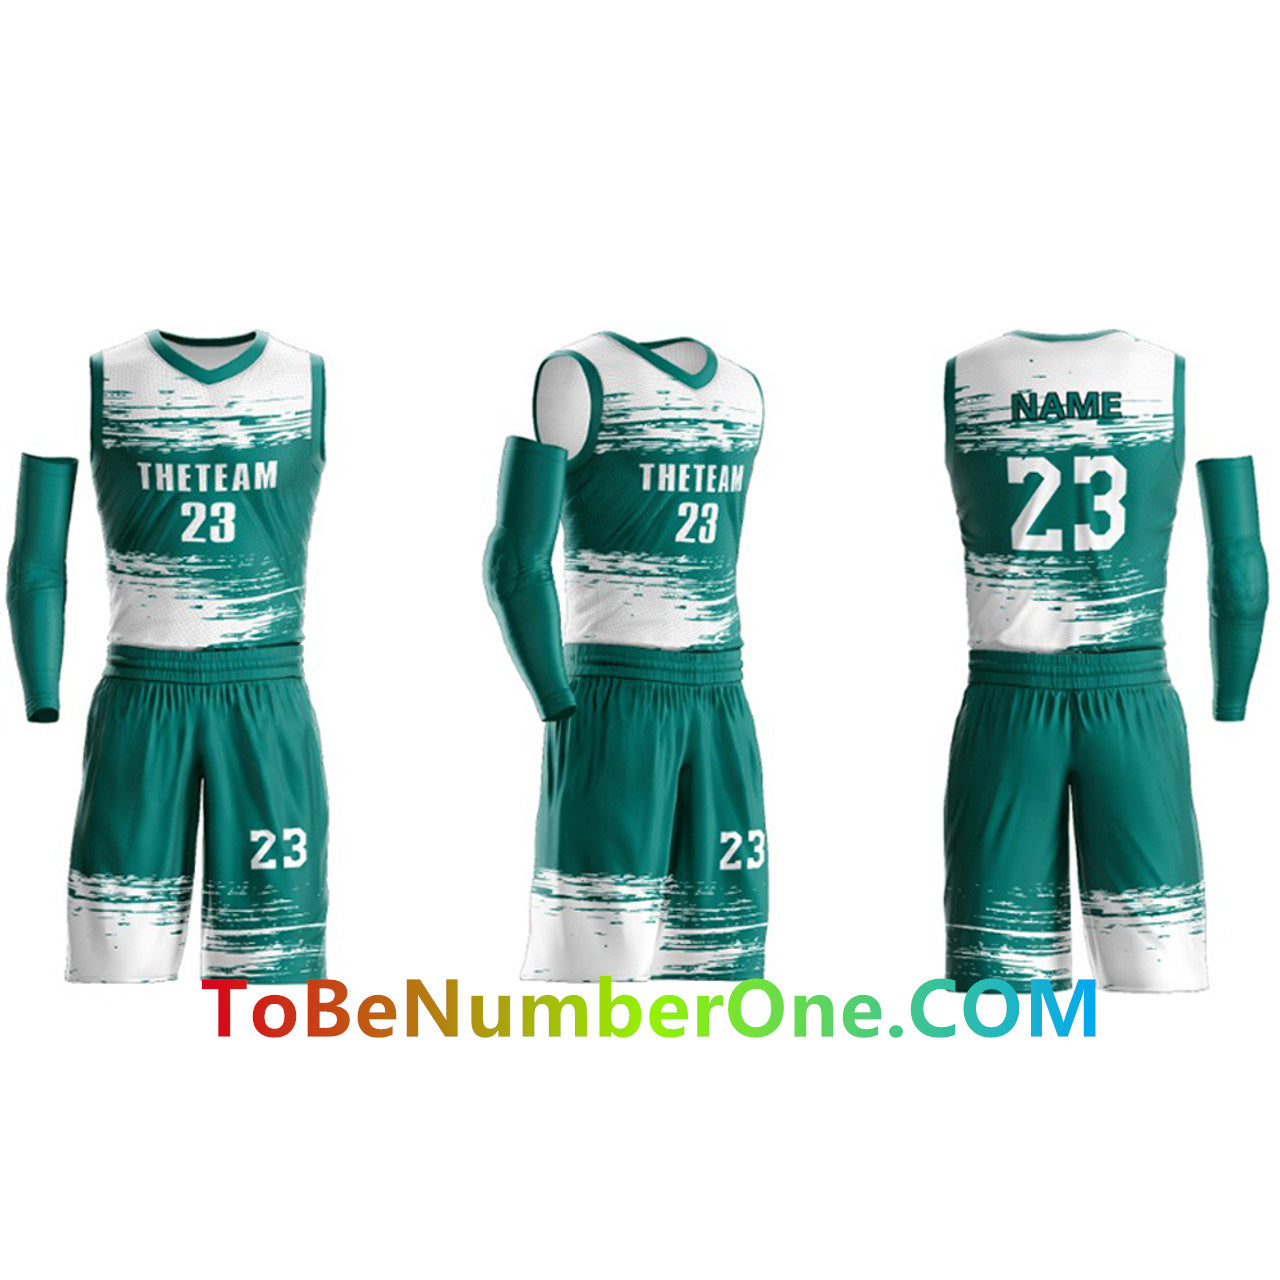 Custom Full Sublimated Basketball Set Tops and shorts - Make Your OWN Jersey - Personalized Team Uniforms B033